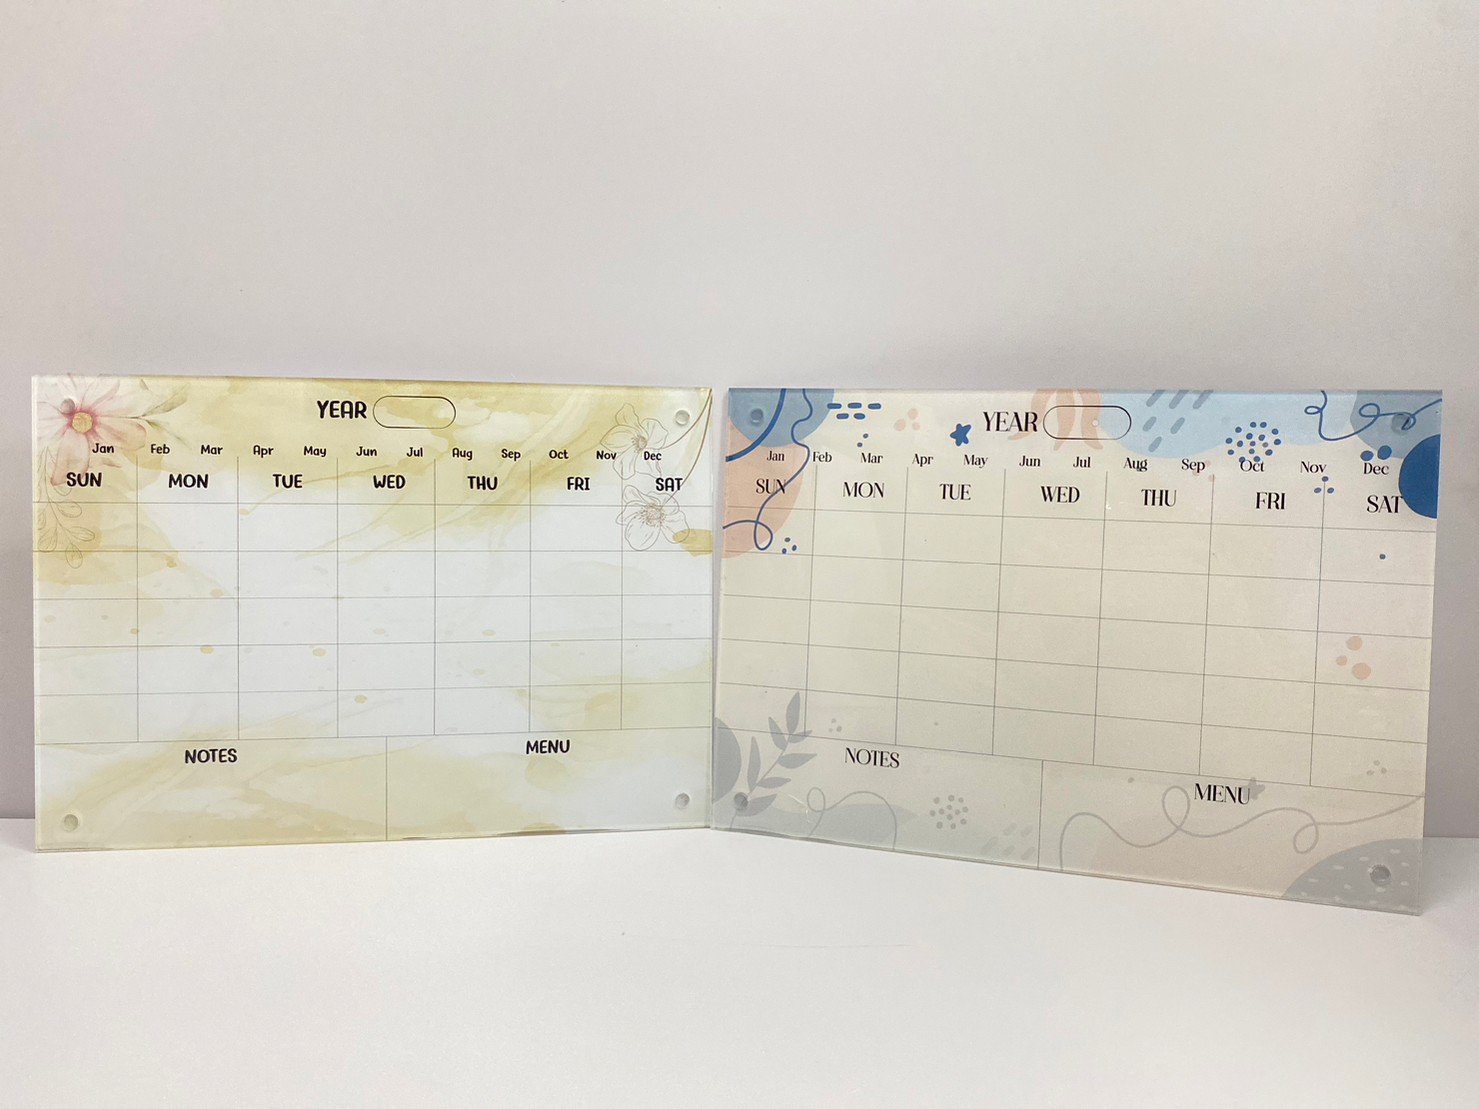 Acrylic calendar can be written and erased.